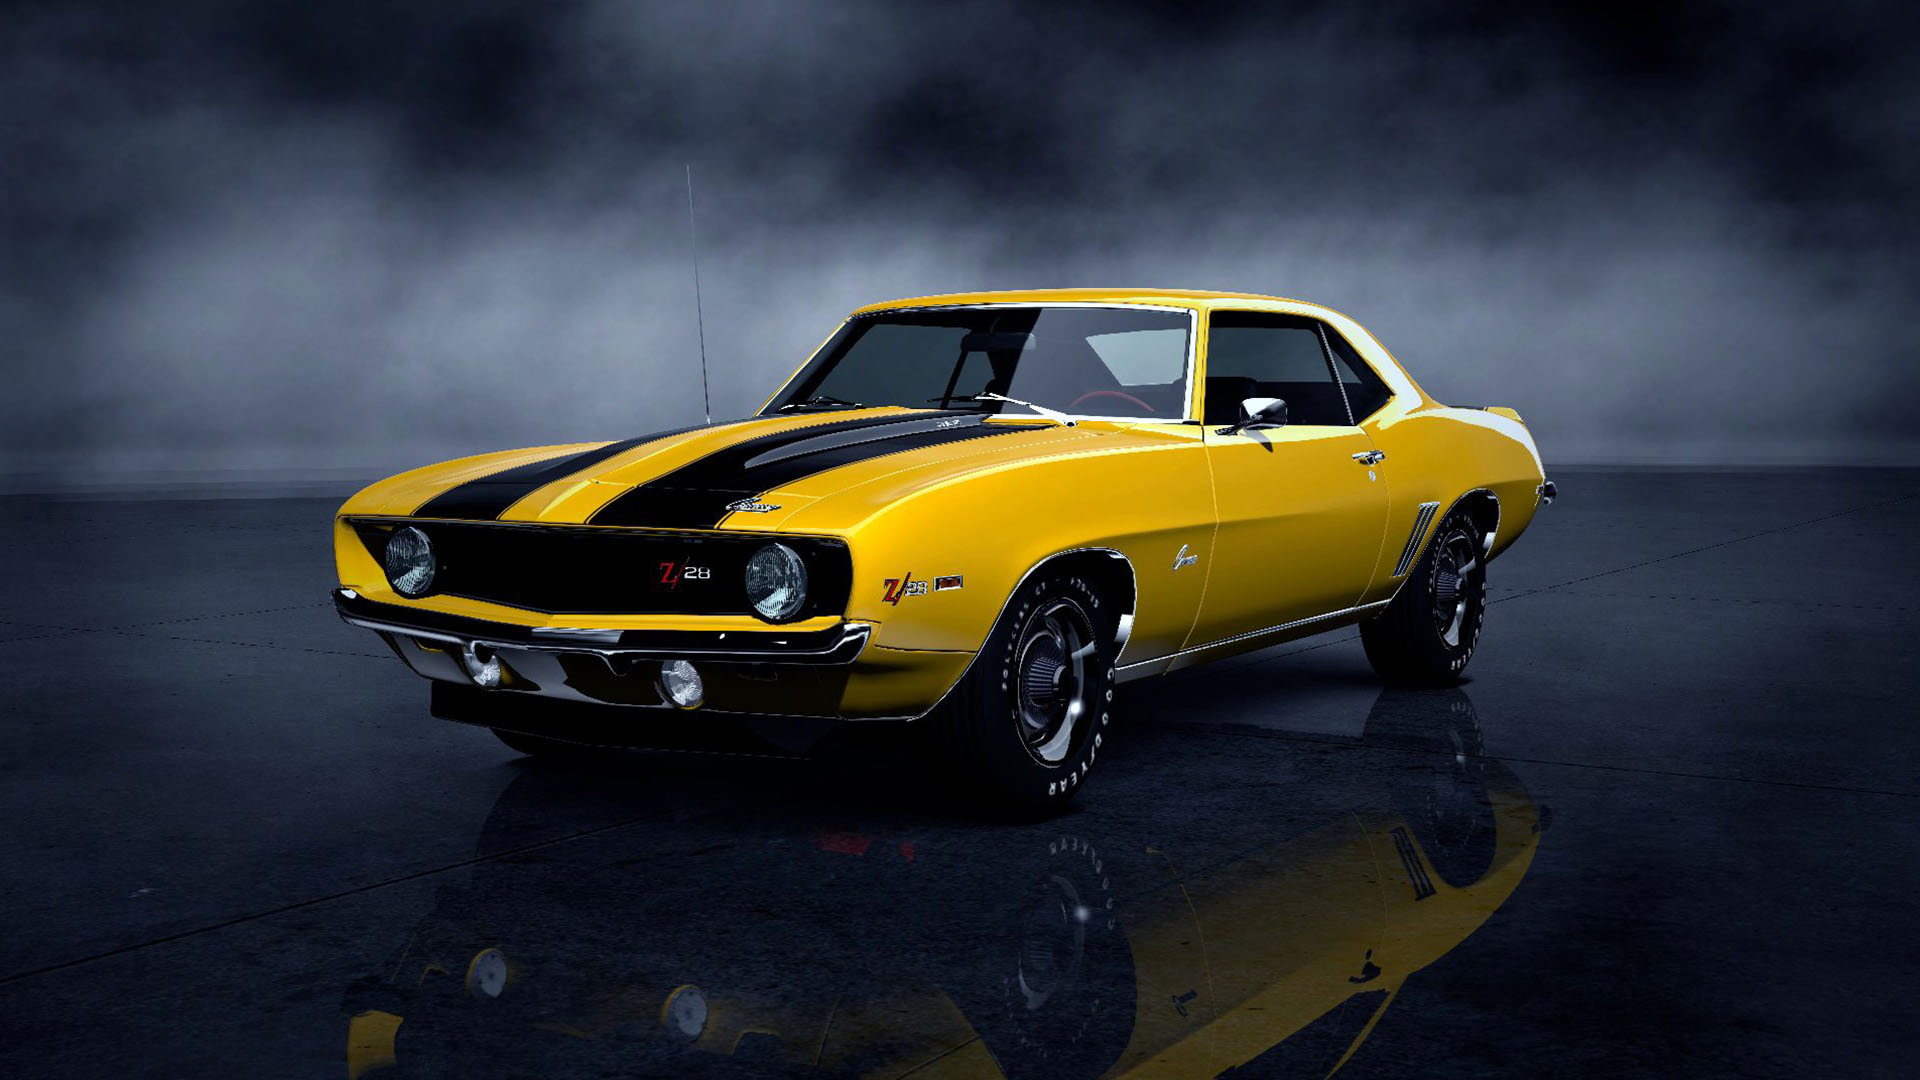 Wallpaper ID 688974  no people road vehicle American cars land  vehicle clean parking outdoors mode of transportation white 1080P  city Chevrolet Camaro Z28 garage free download